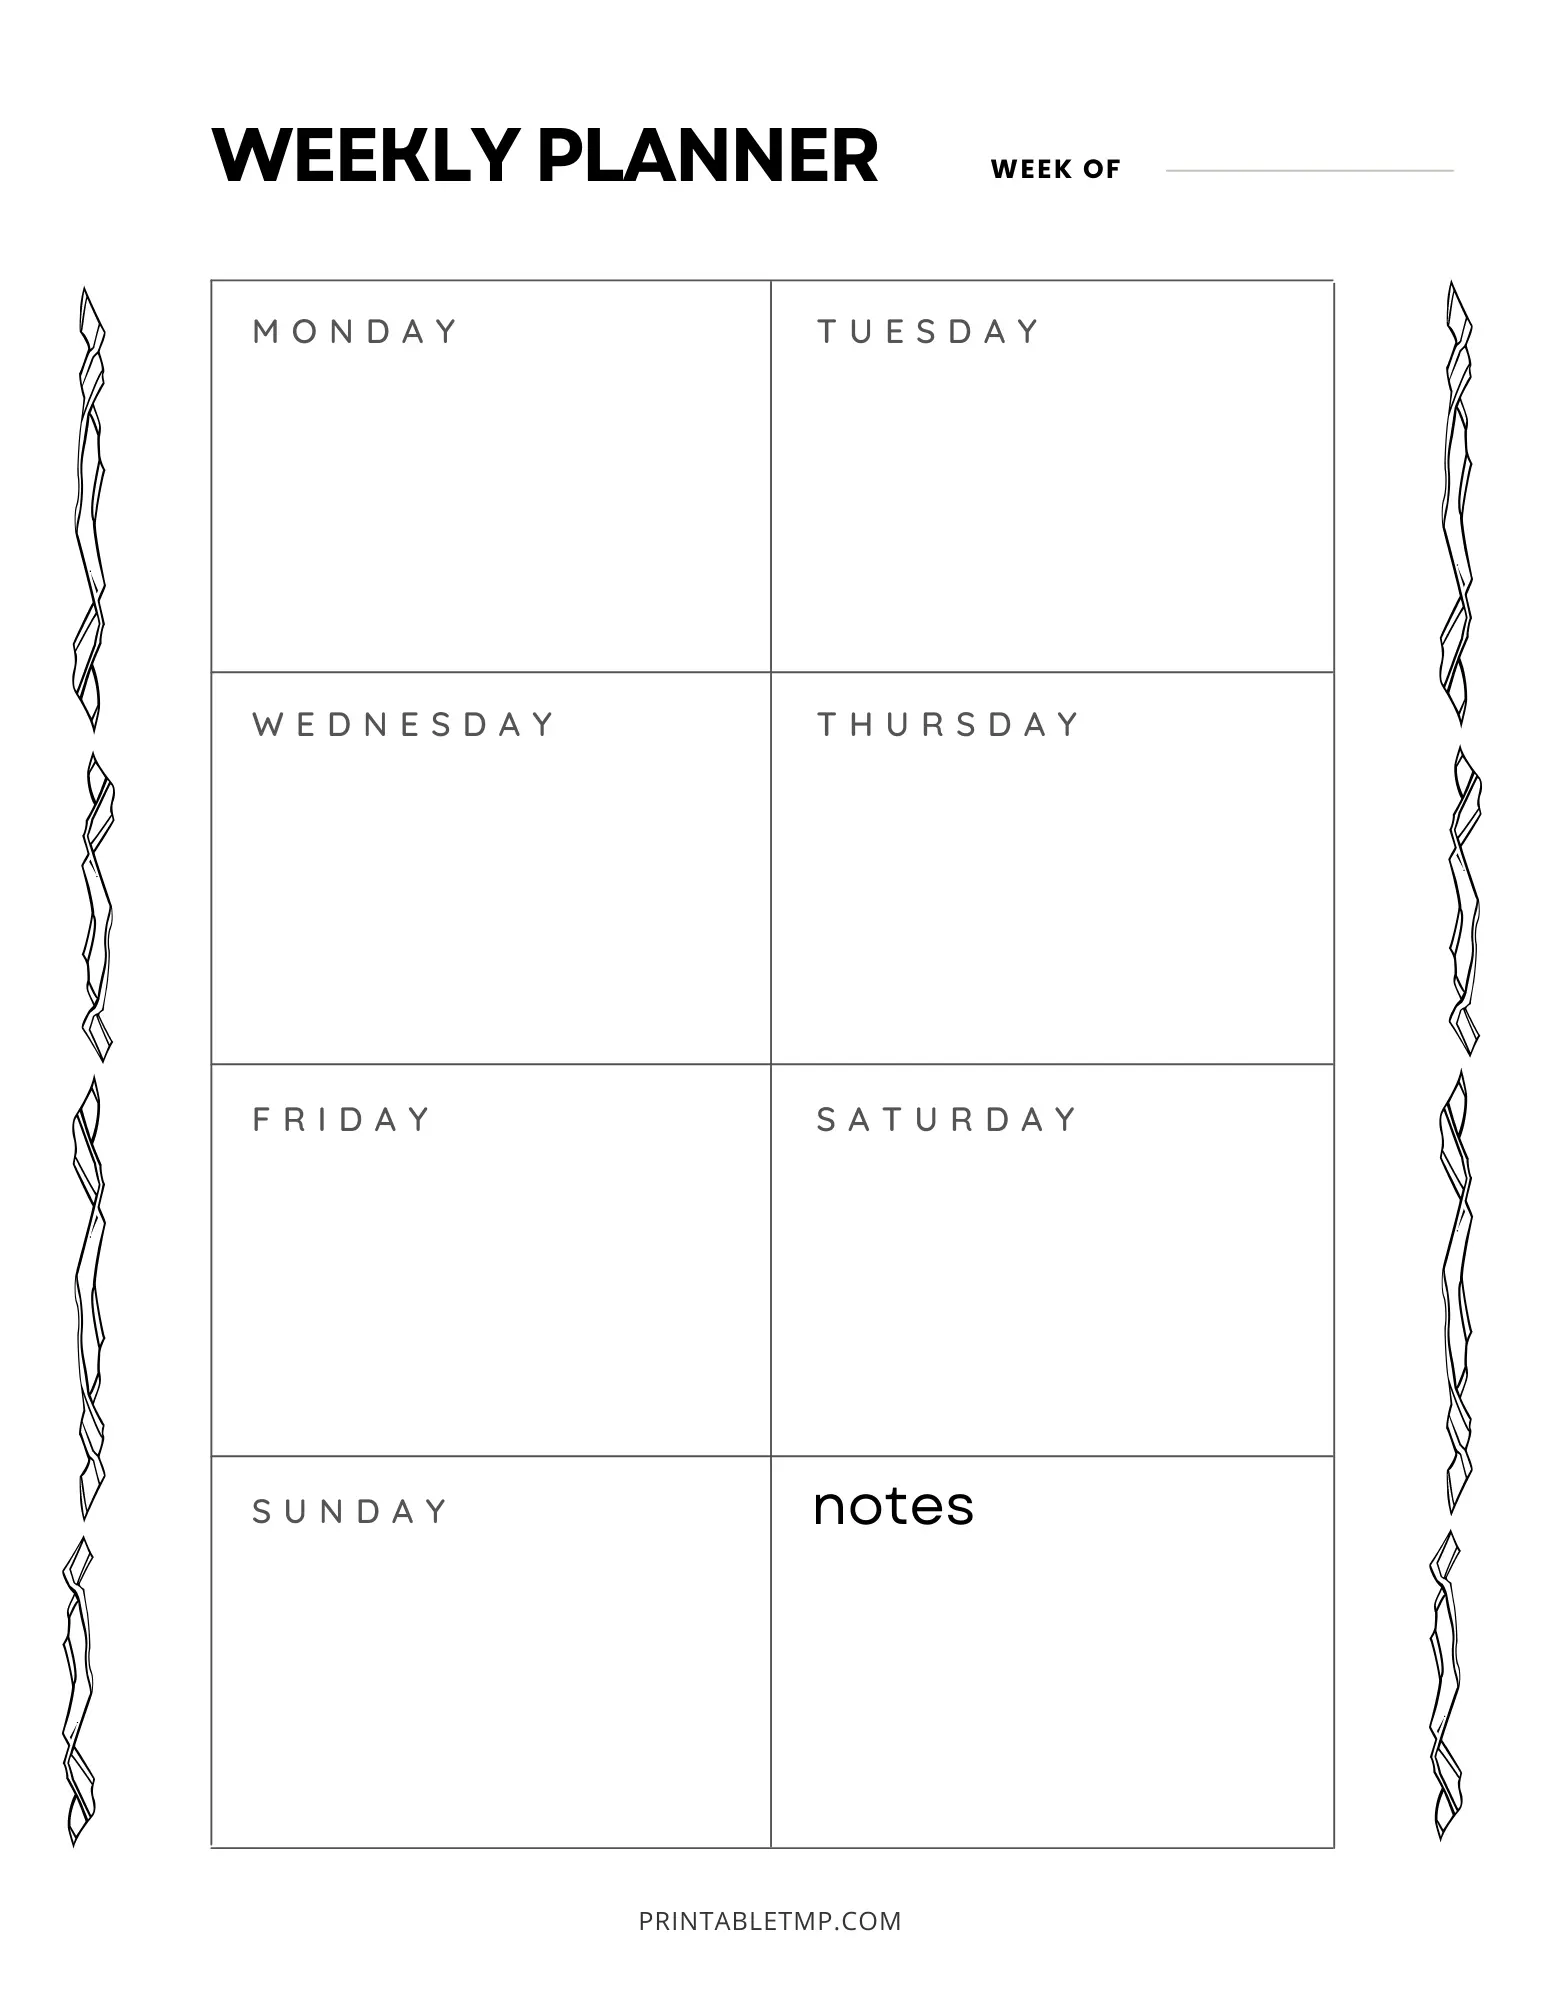 Weekly Planner Printable Black and White